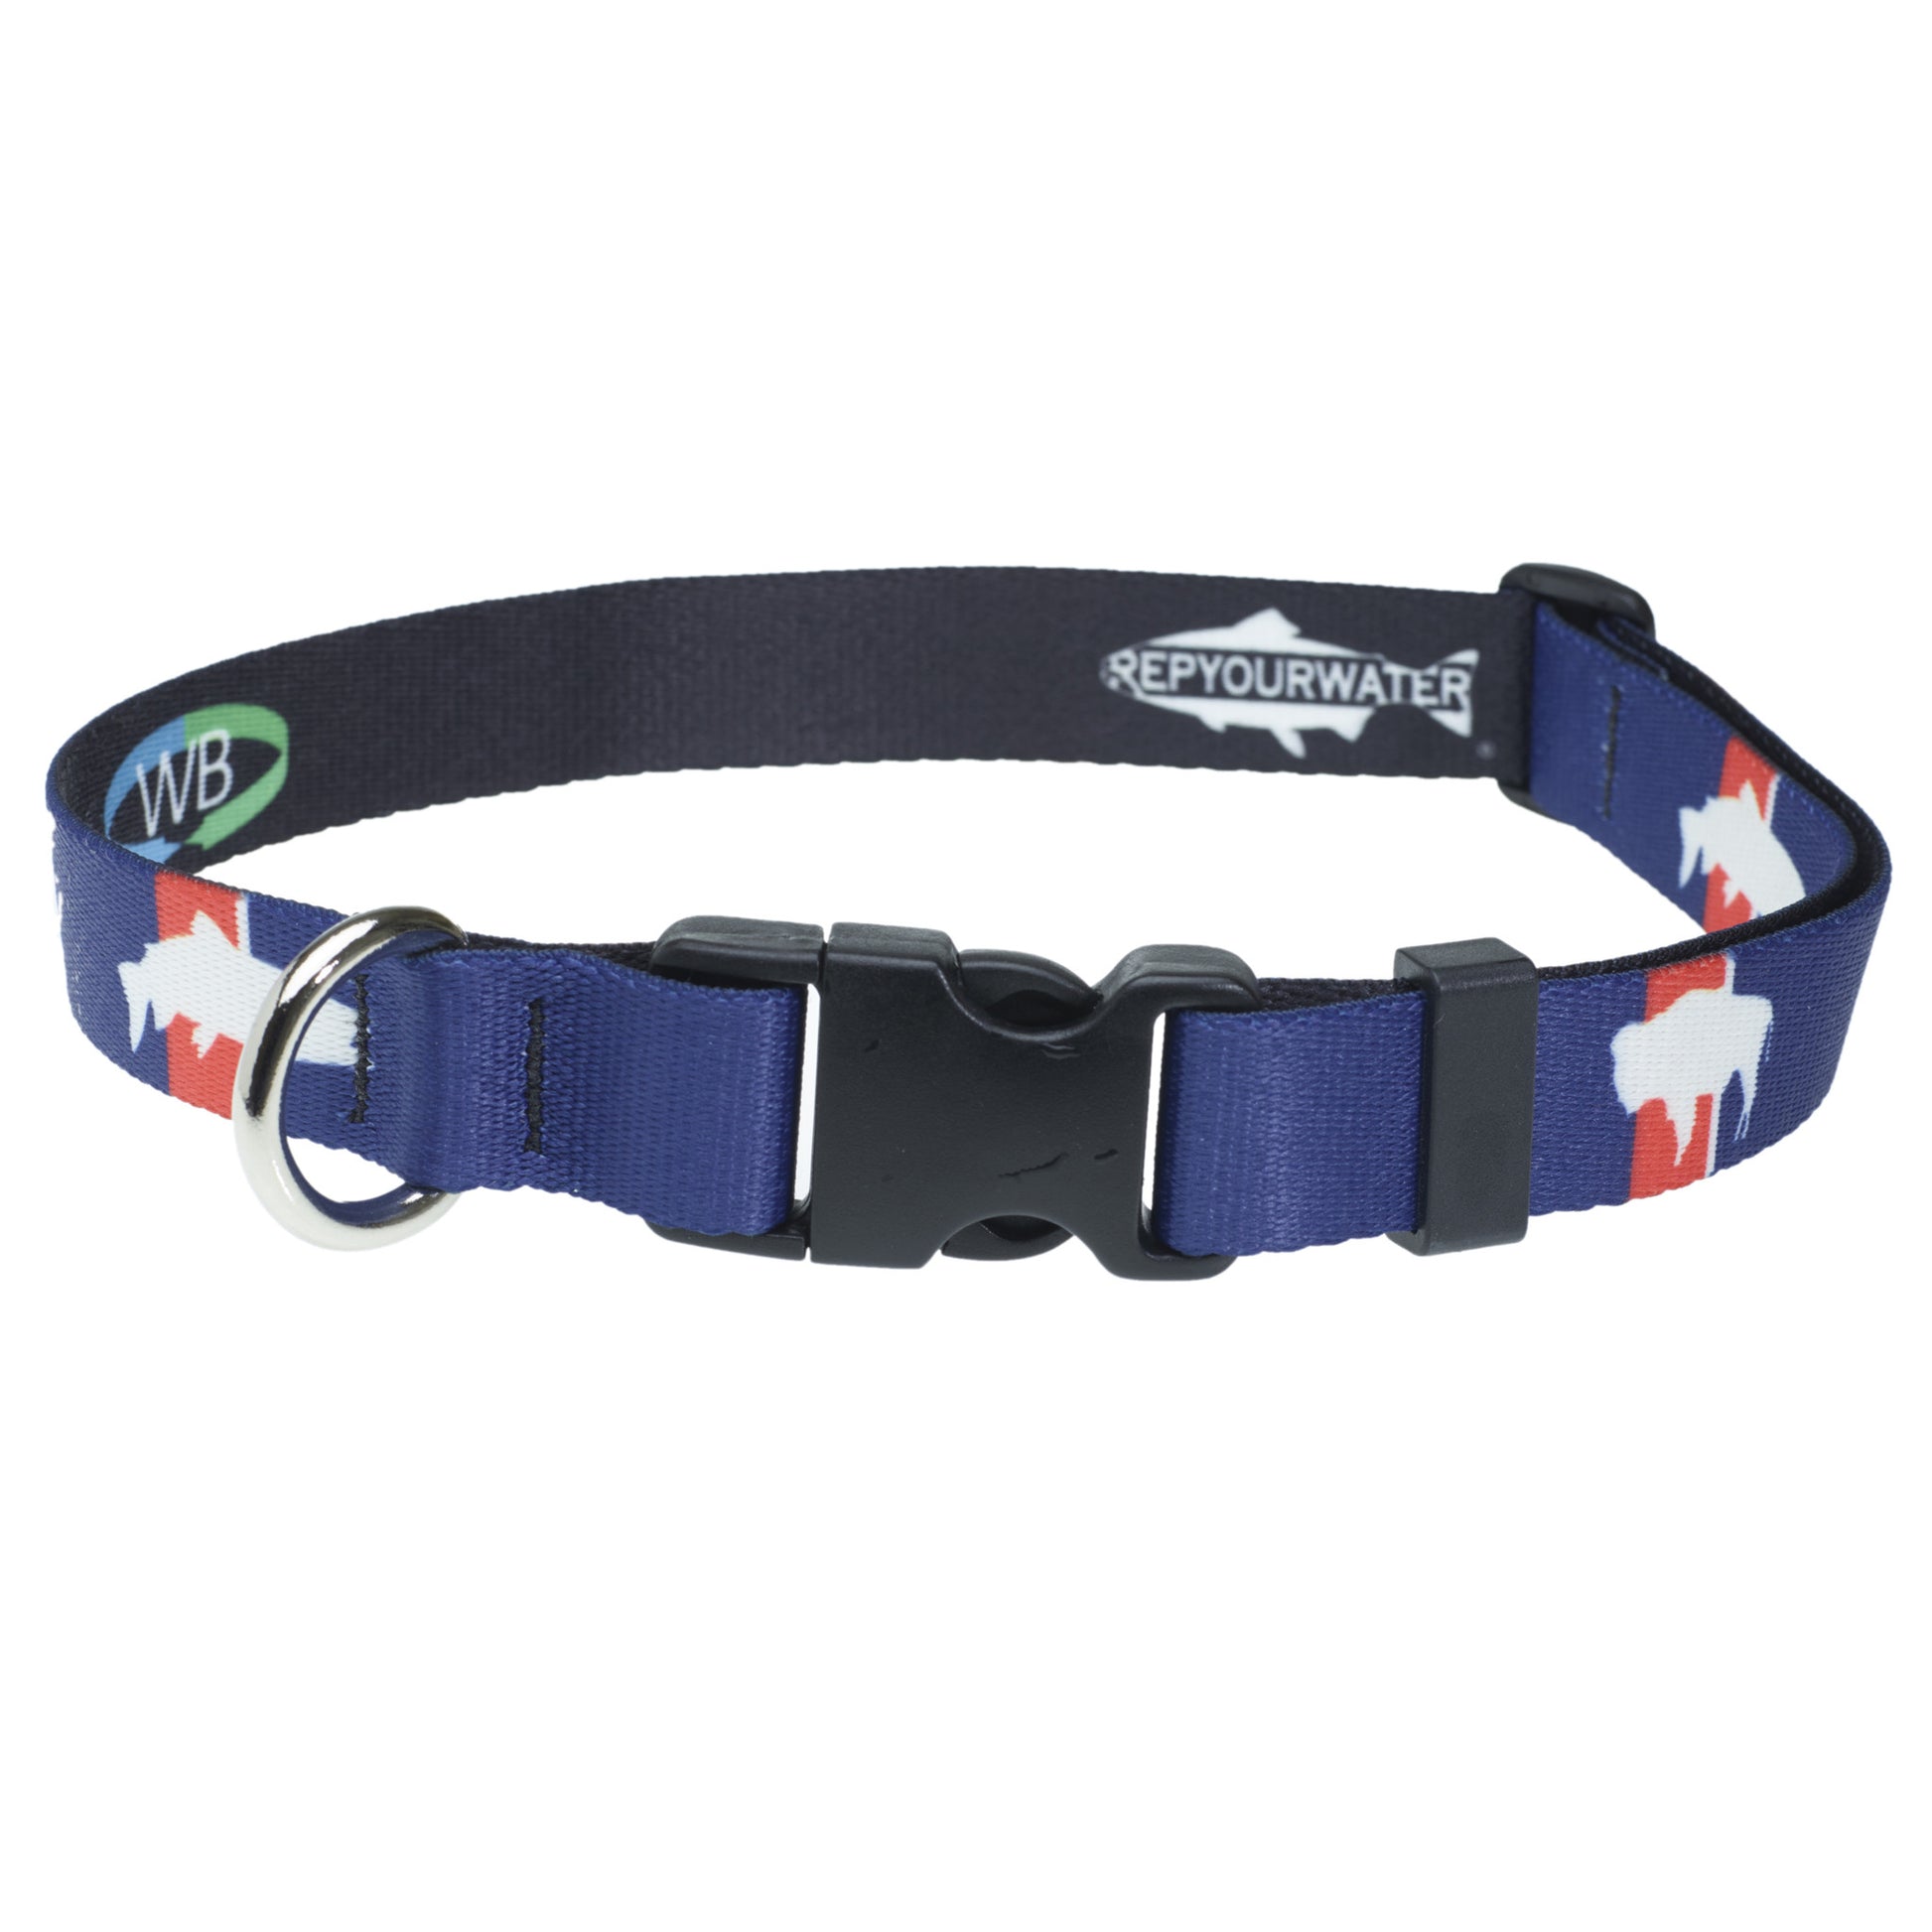 Collar with plastic clasp and metal D ring.  Red and blue featuring graphics of bison and trout.